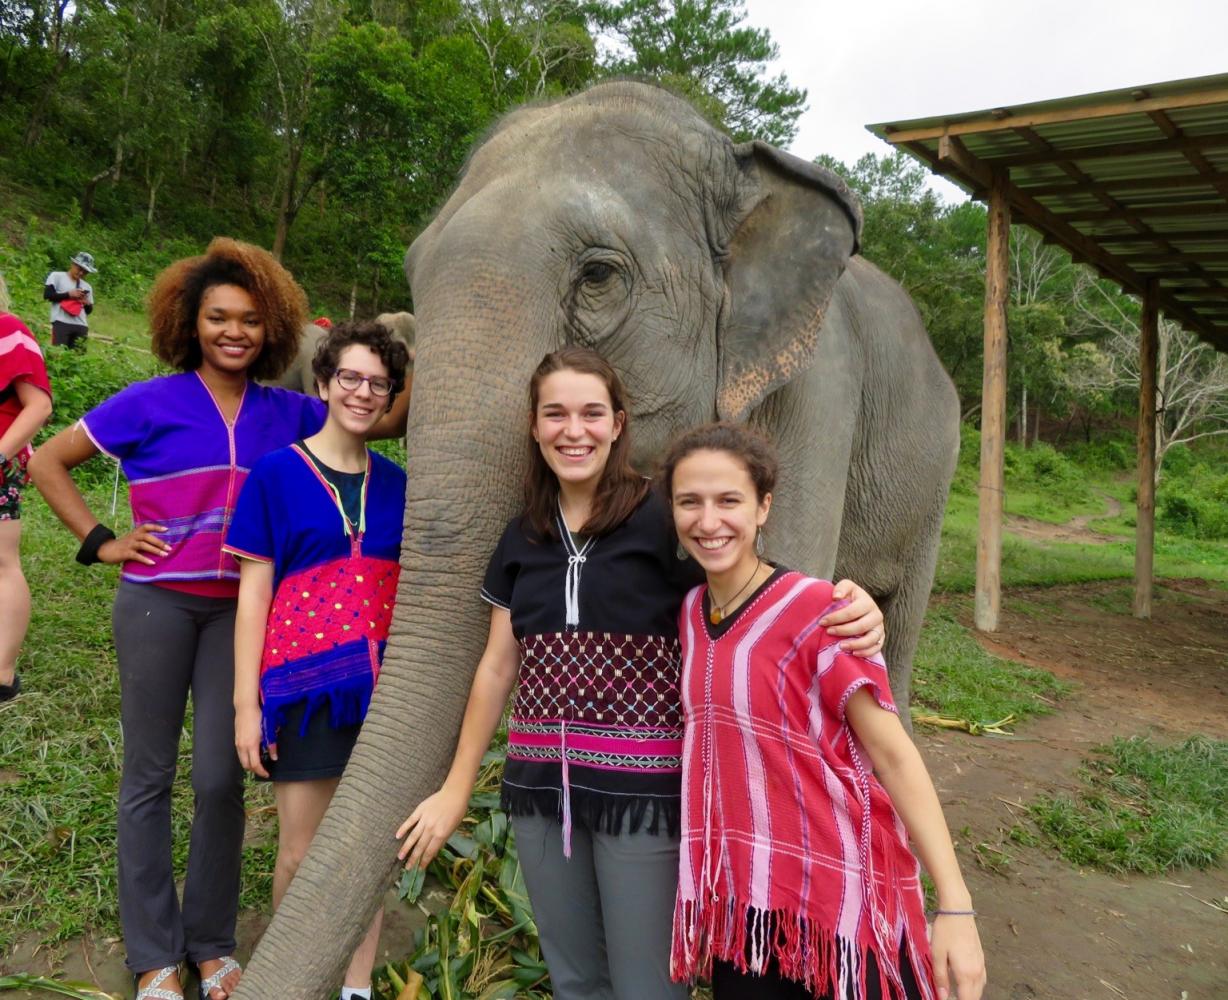 A group of women stand next to an elephant